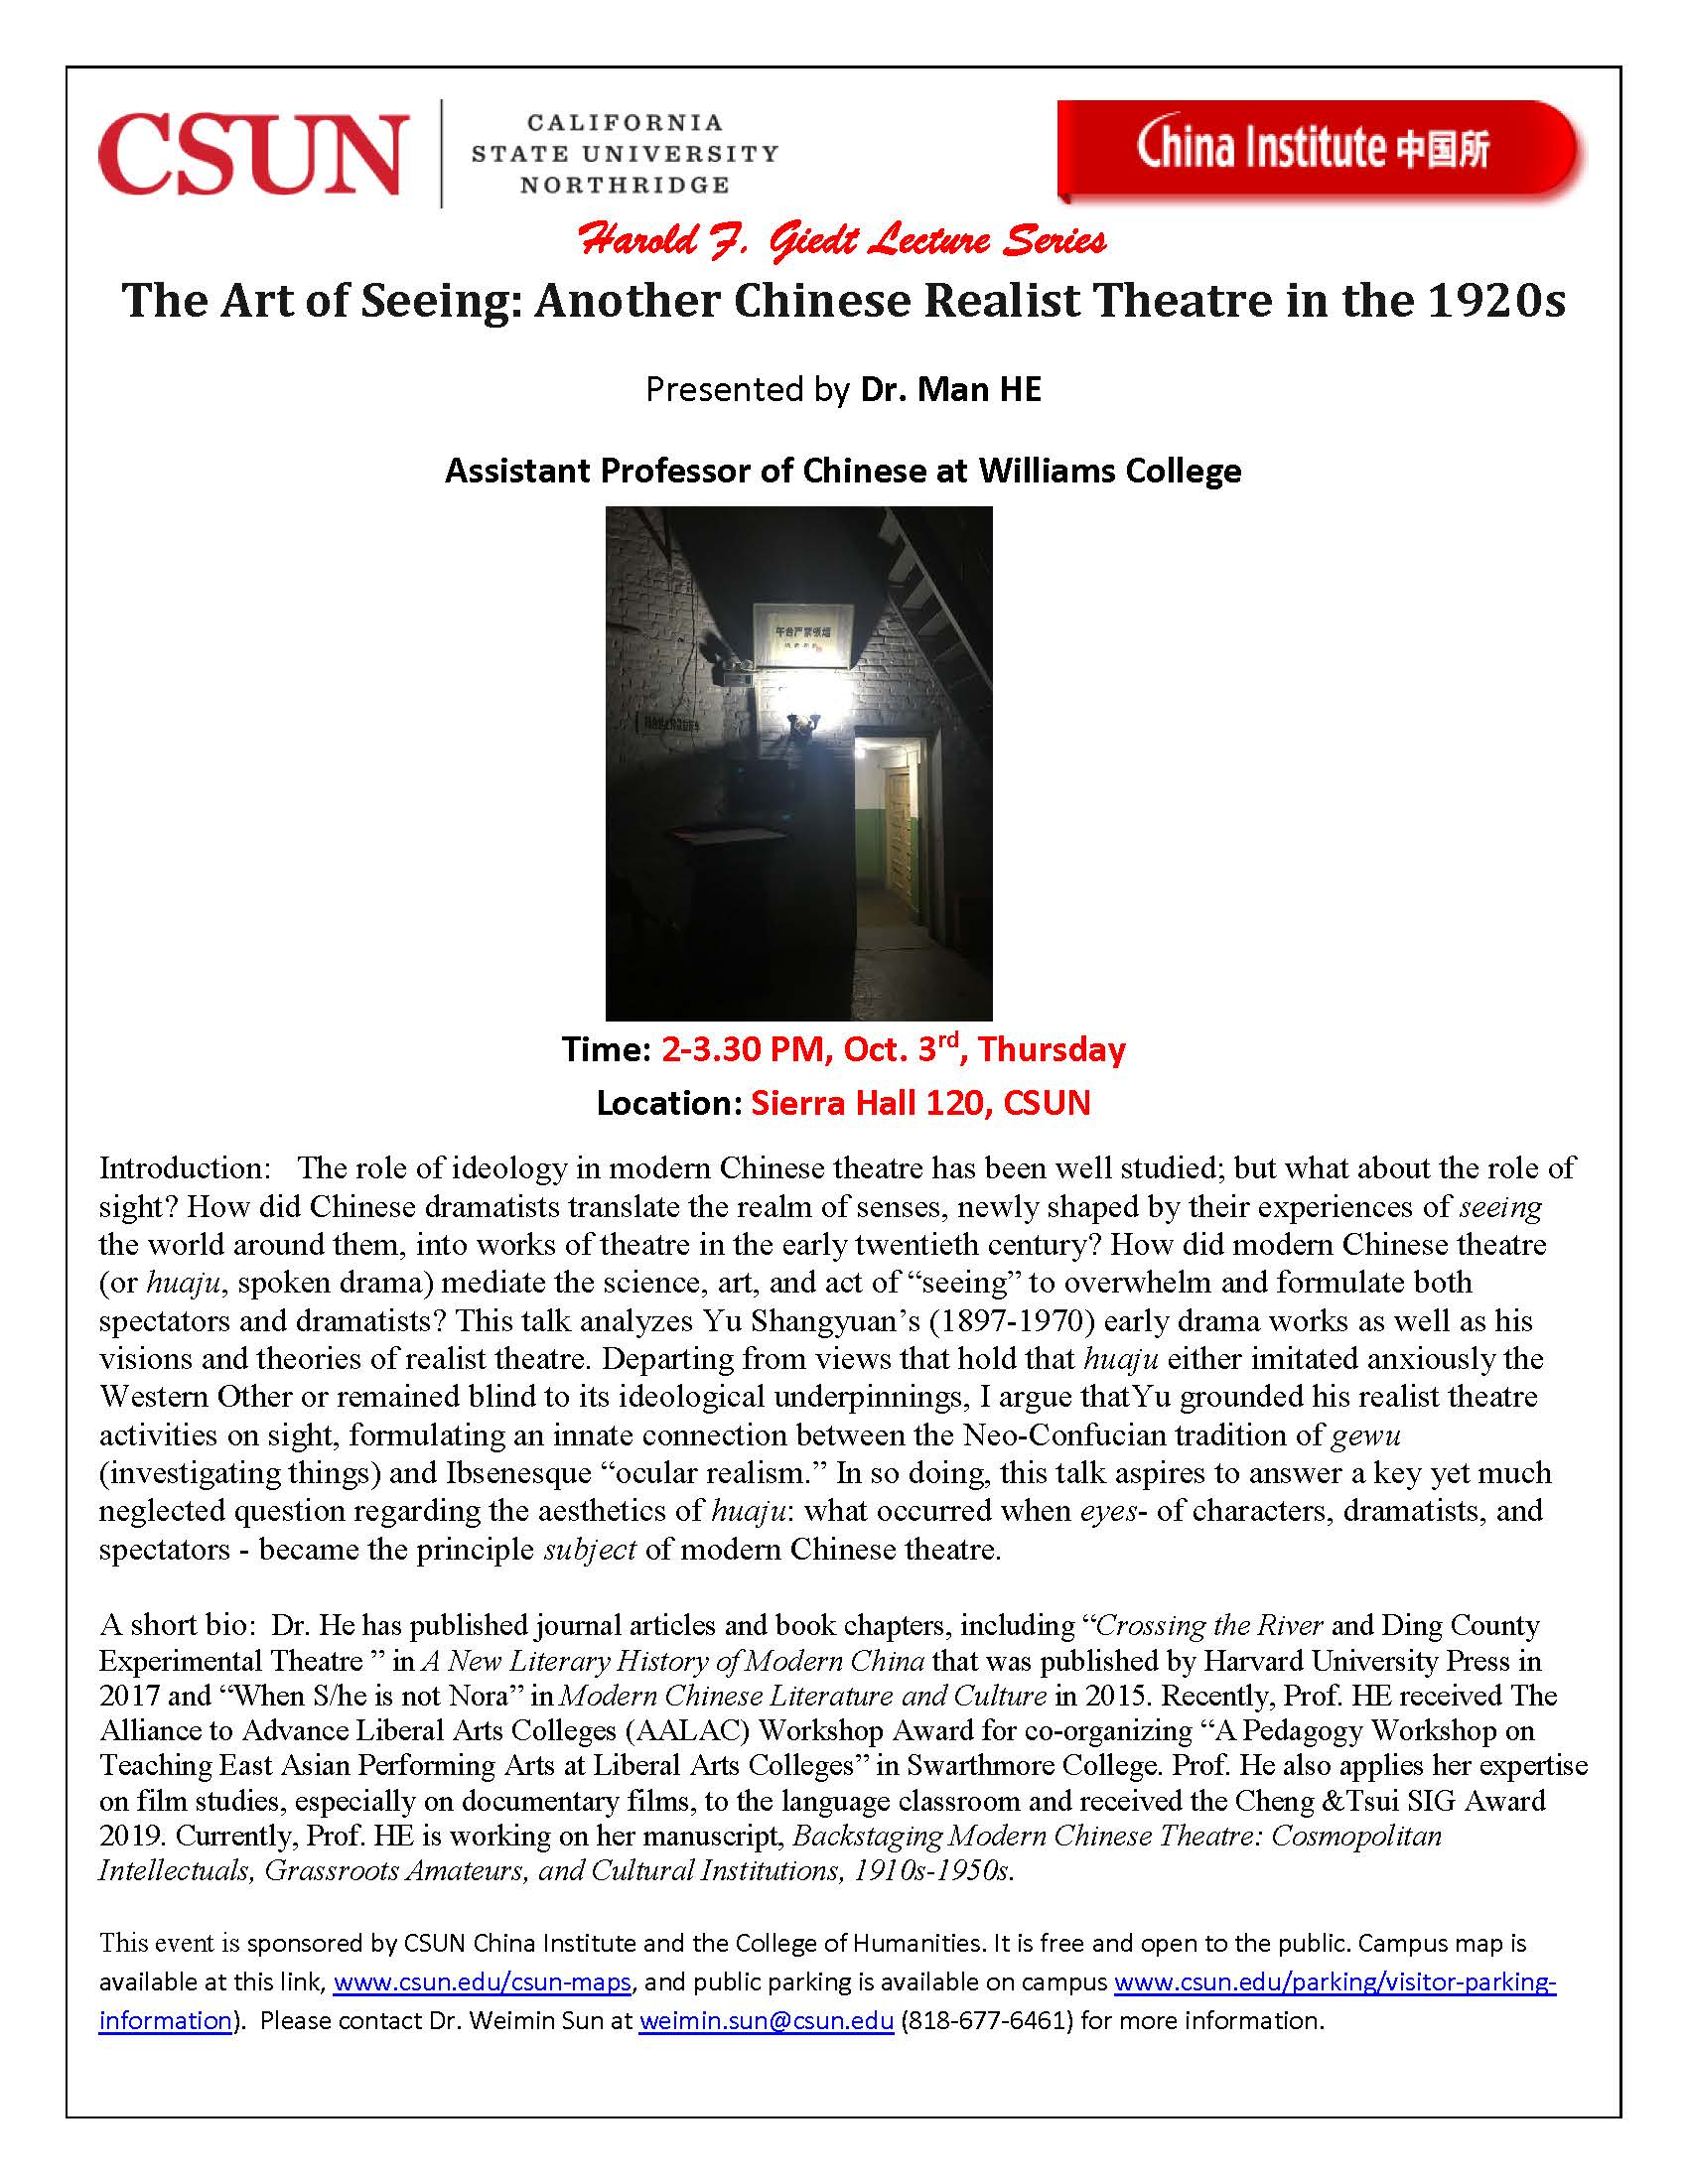 The Art of Seeing: Another Chinese Realist Theatre in the 1920s